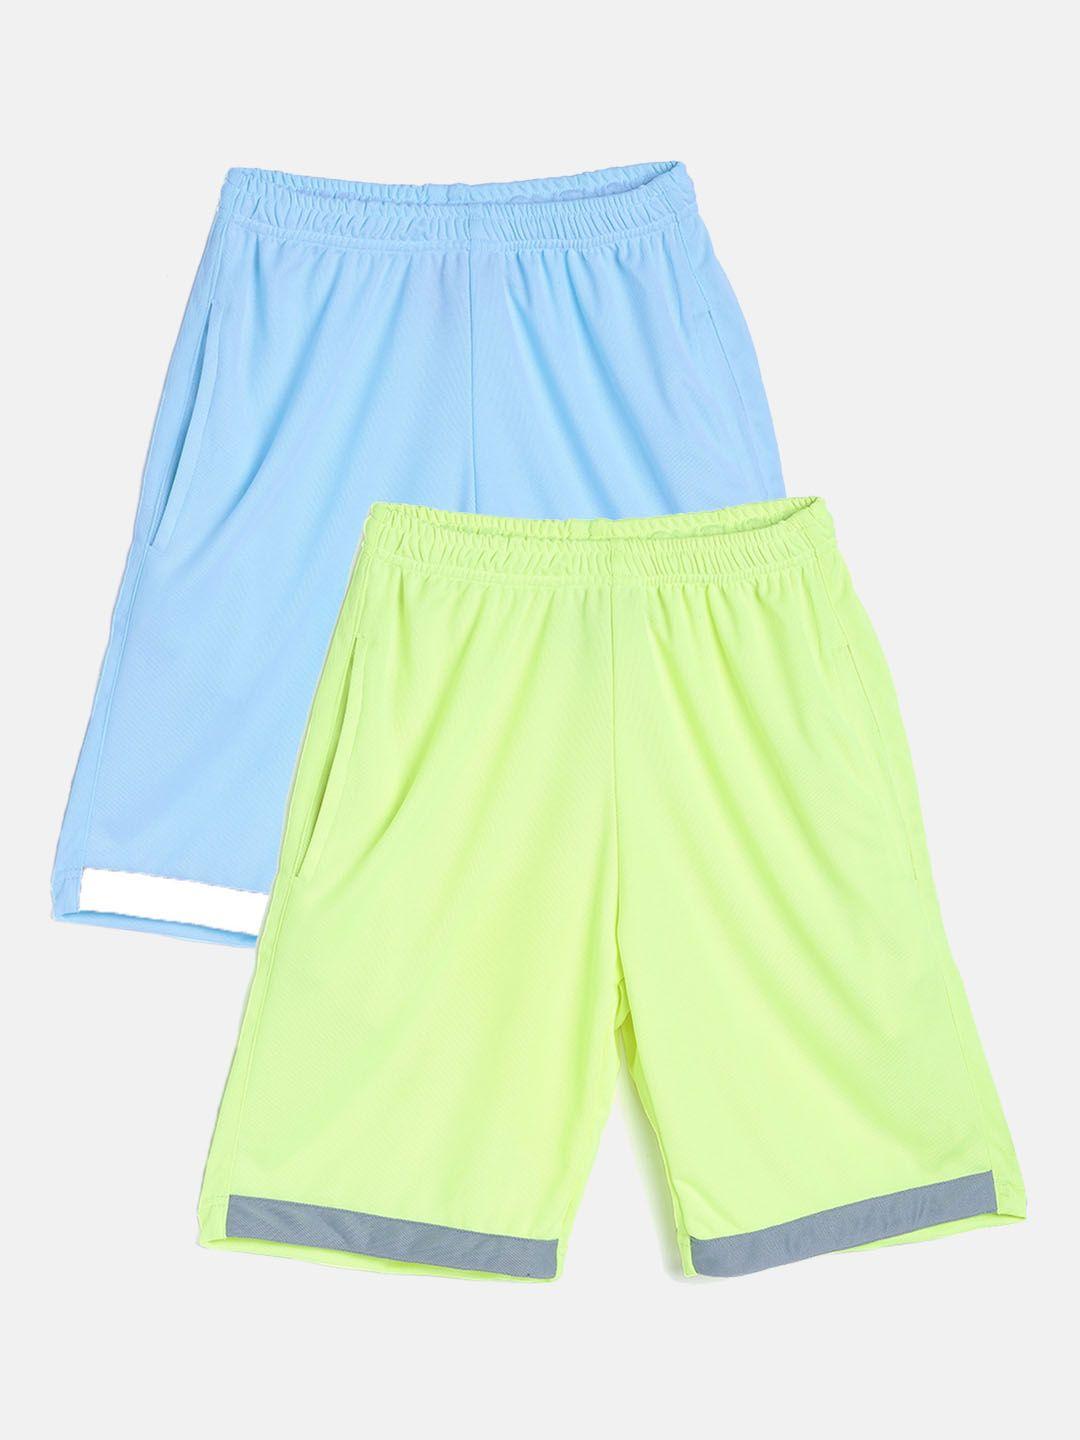 tiny hug boys pack of 2 fluorescent green & blue high-rise outdoor sports shorts